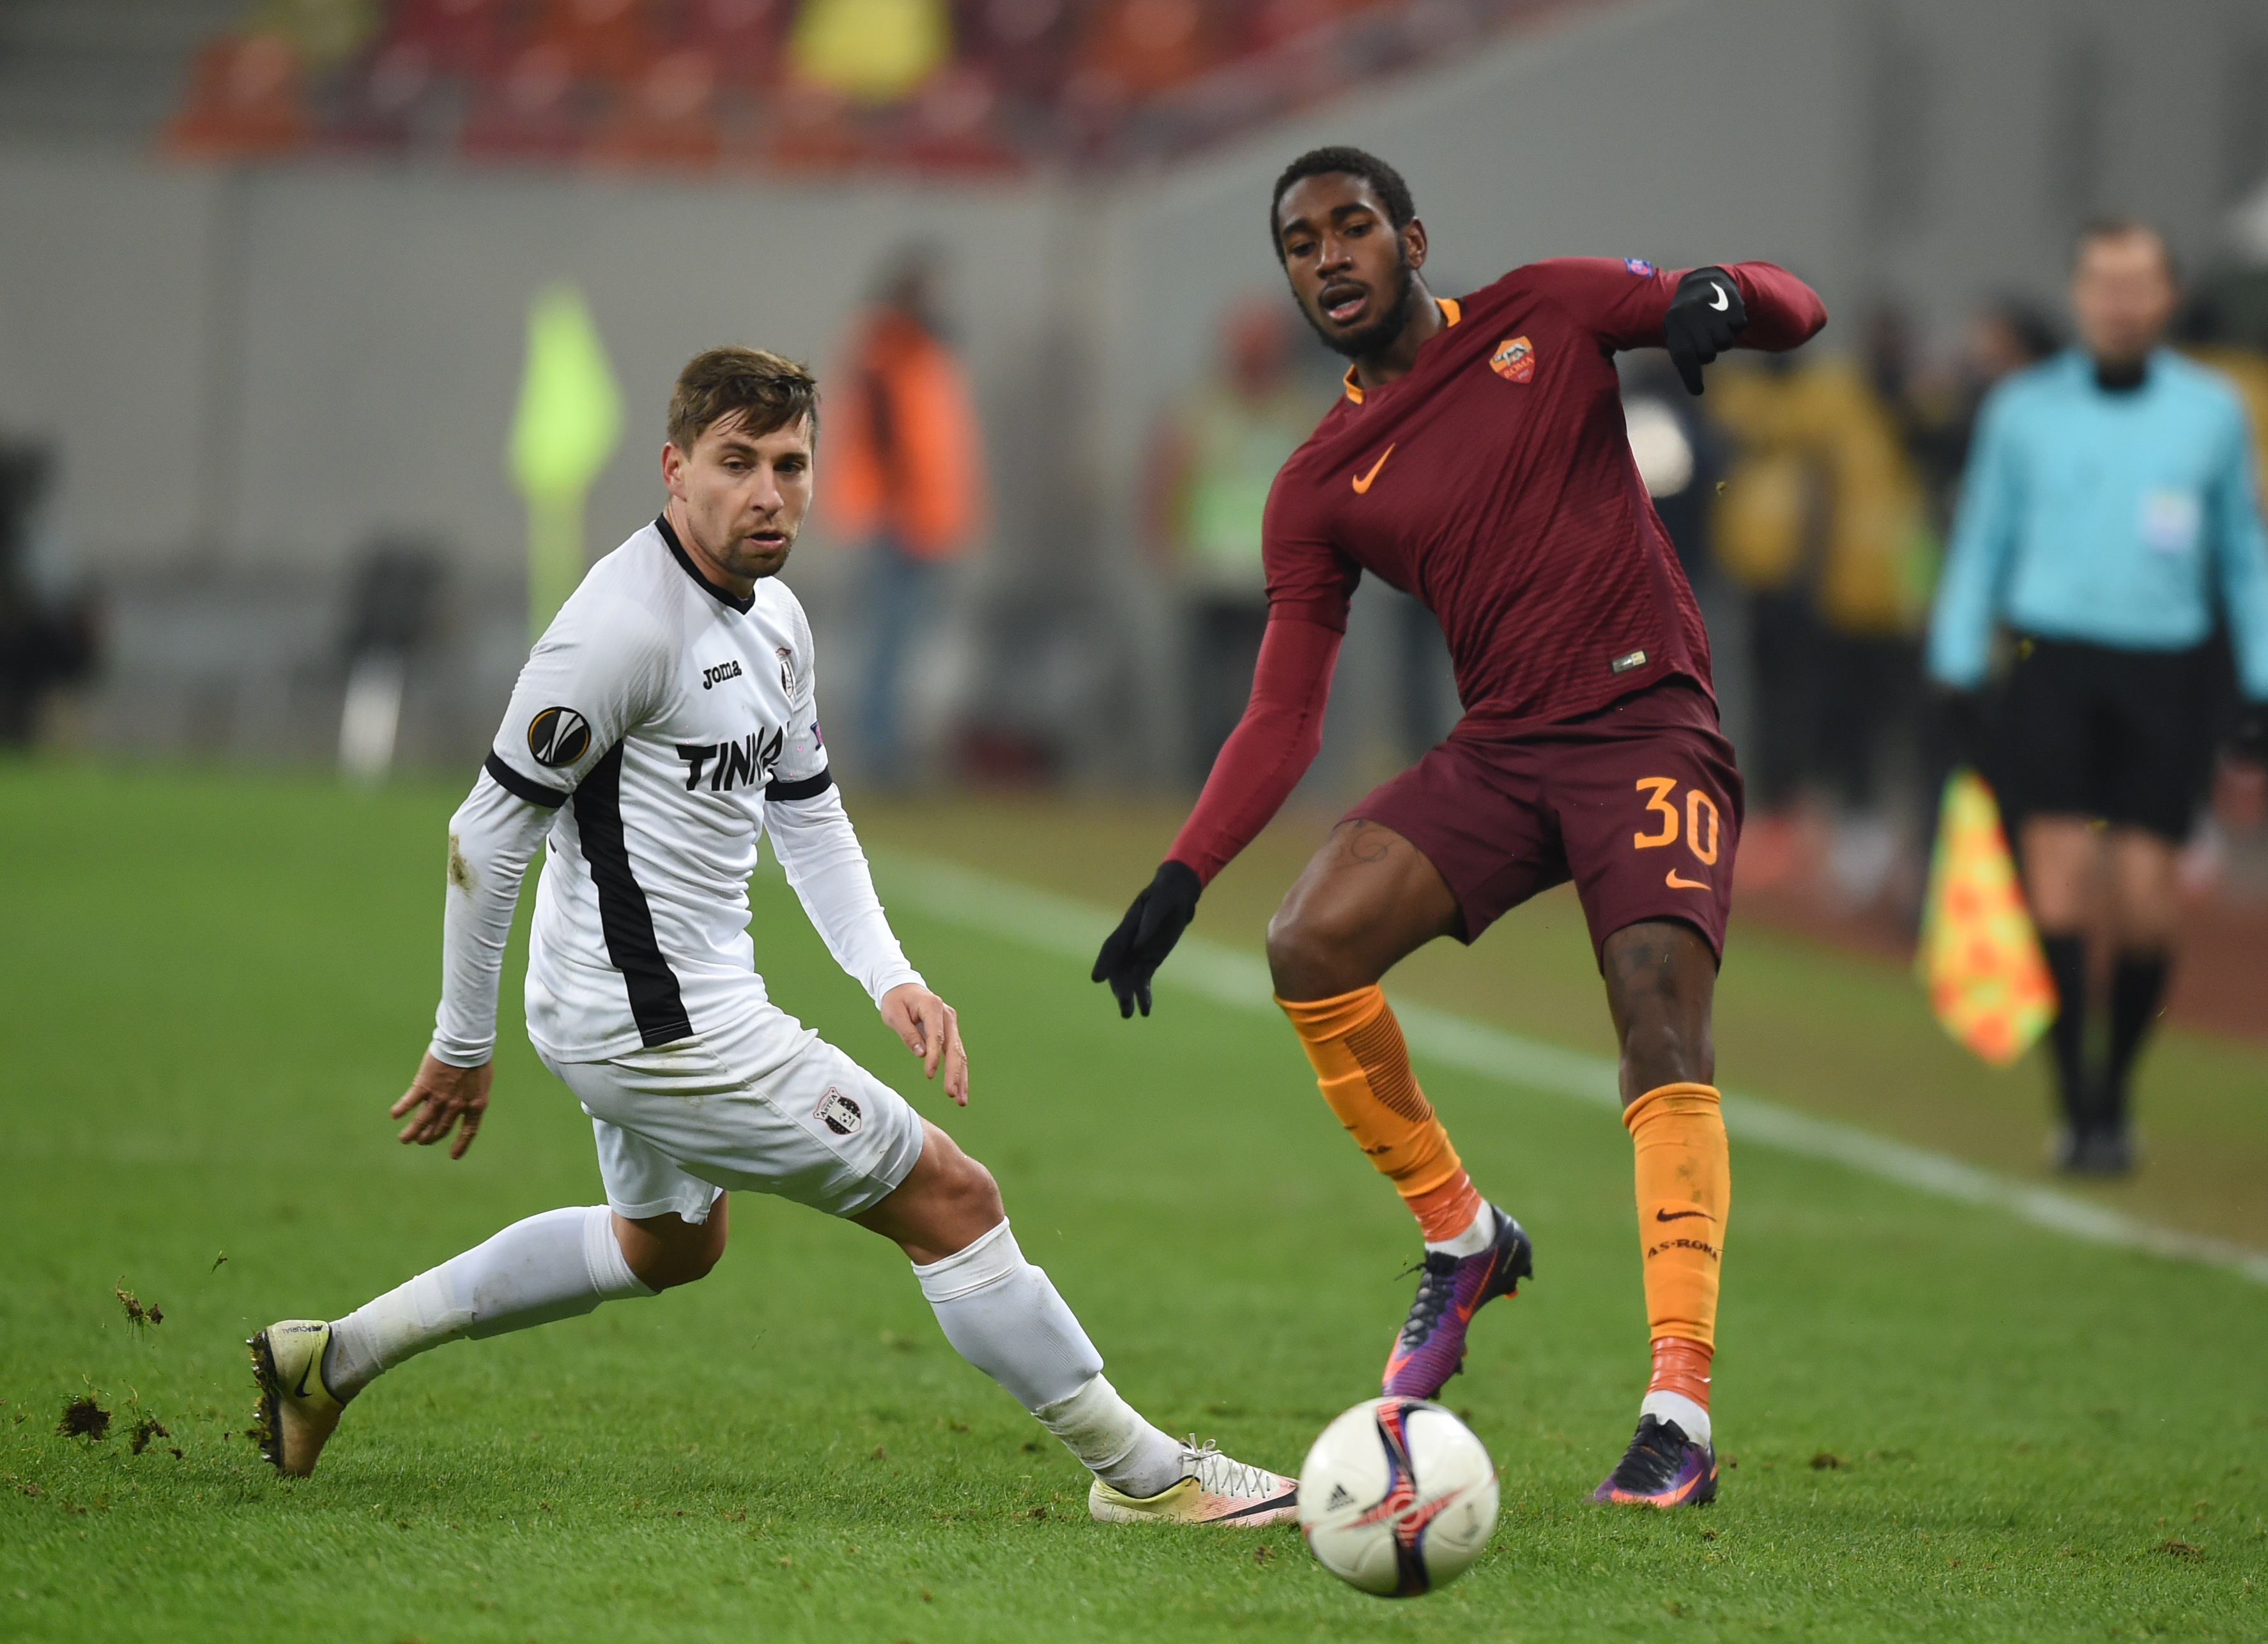 D’Agostino: “I advise Gerson to remain in Roma – You need qualities of Maicon in order to play anywhere you want.”